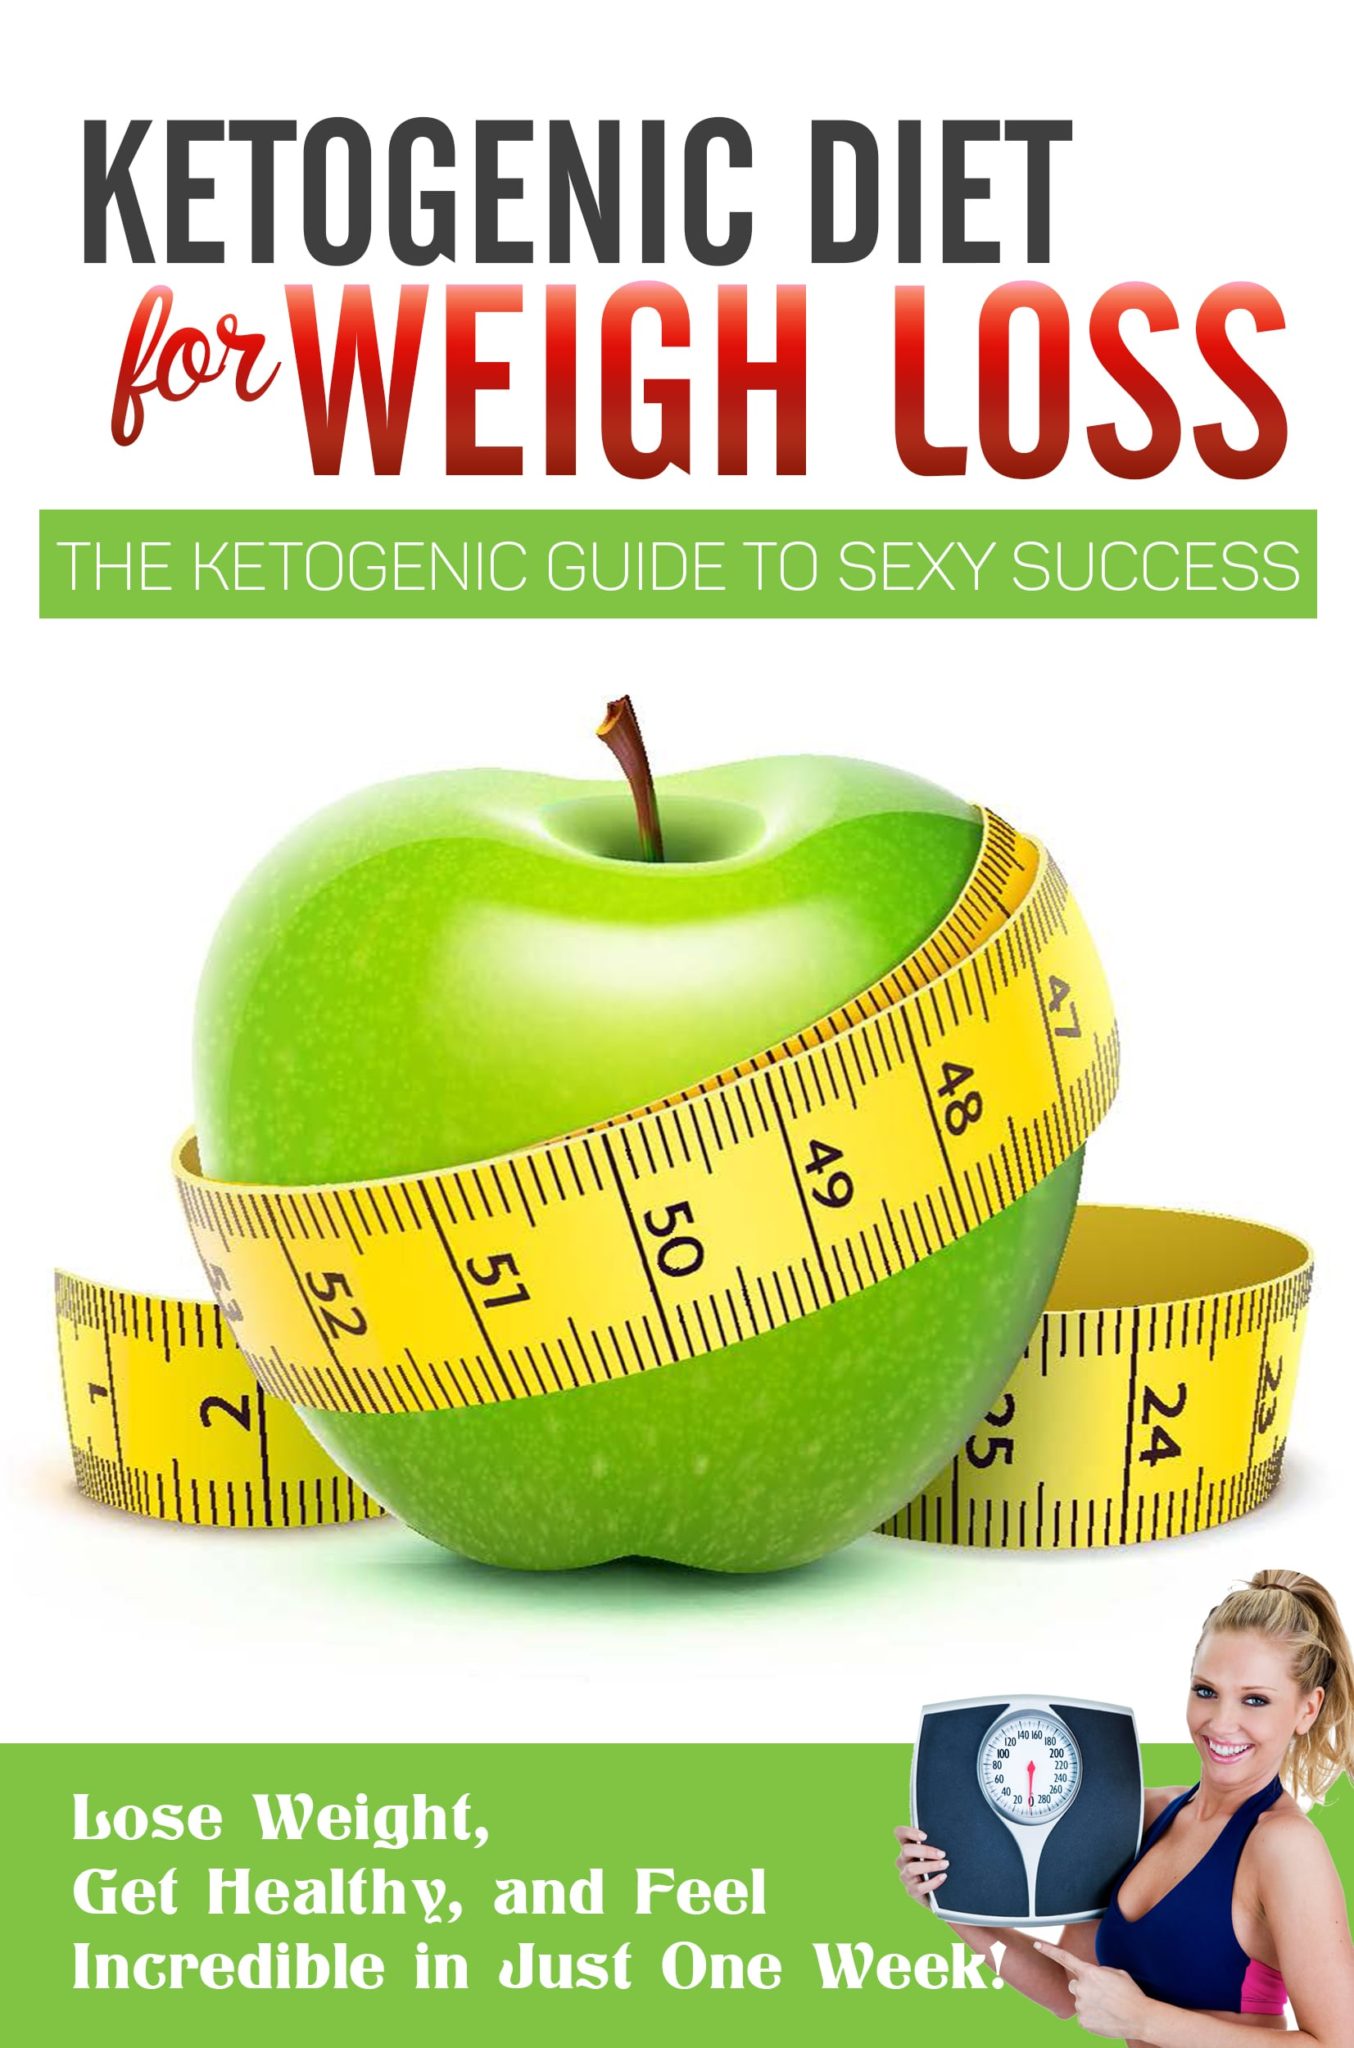 FREE: Lose Weight, Get Healthy, and Feel Incredible in Just One Week! The Proven Ketogenic Diet For Weight Loss! The Ketogenic Diet Plan Guide To Sexy Success, Tips and Tricks Of Ketogenic Diet Recipes! by Thomas Rio